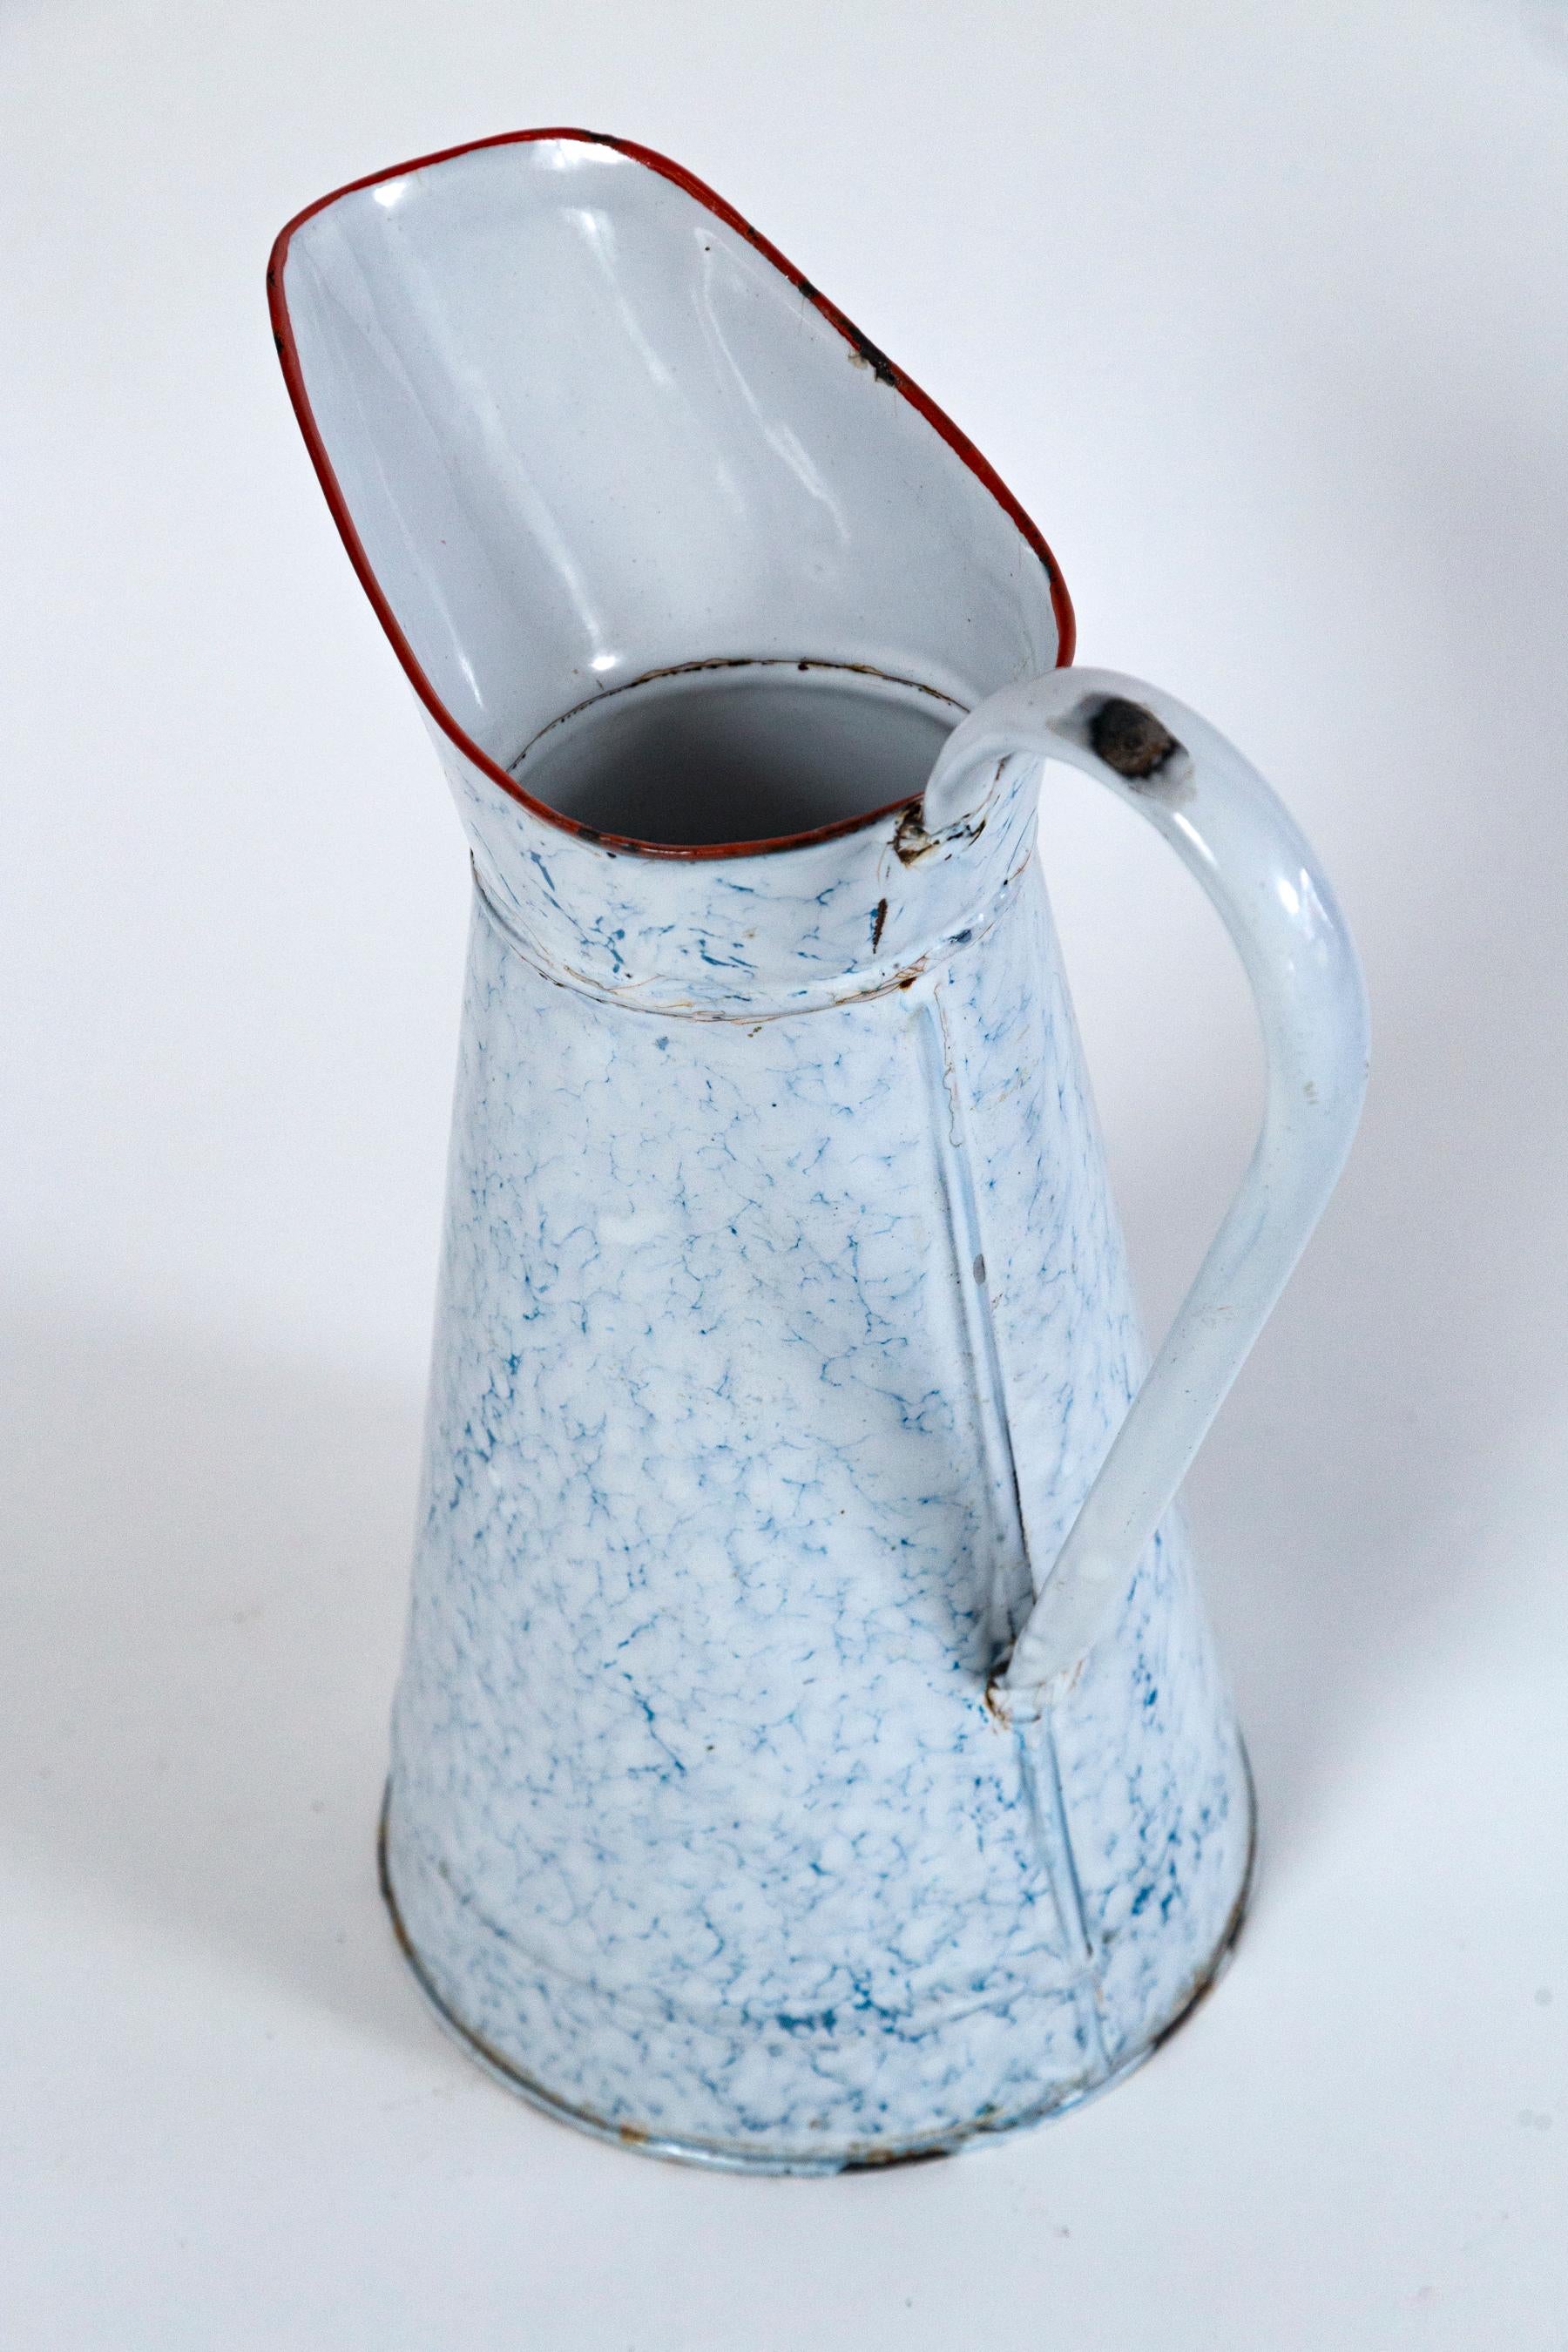 20th Century Vintage French Blue and White Enamelware Pitcher, circa 1920's